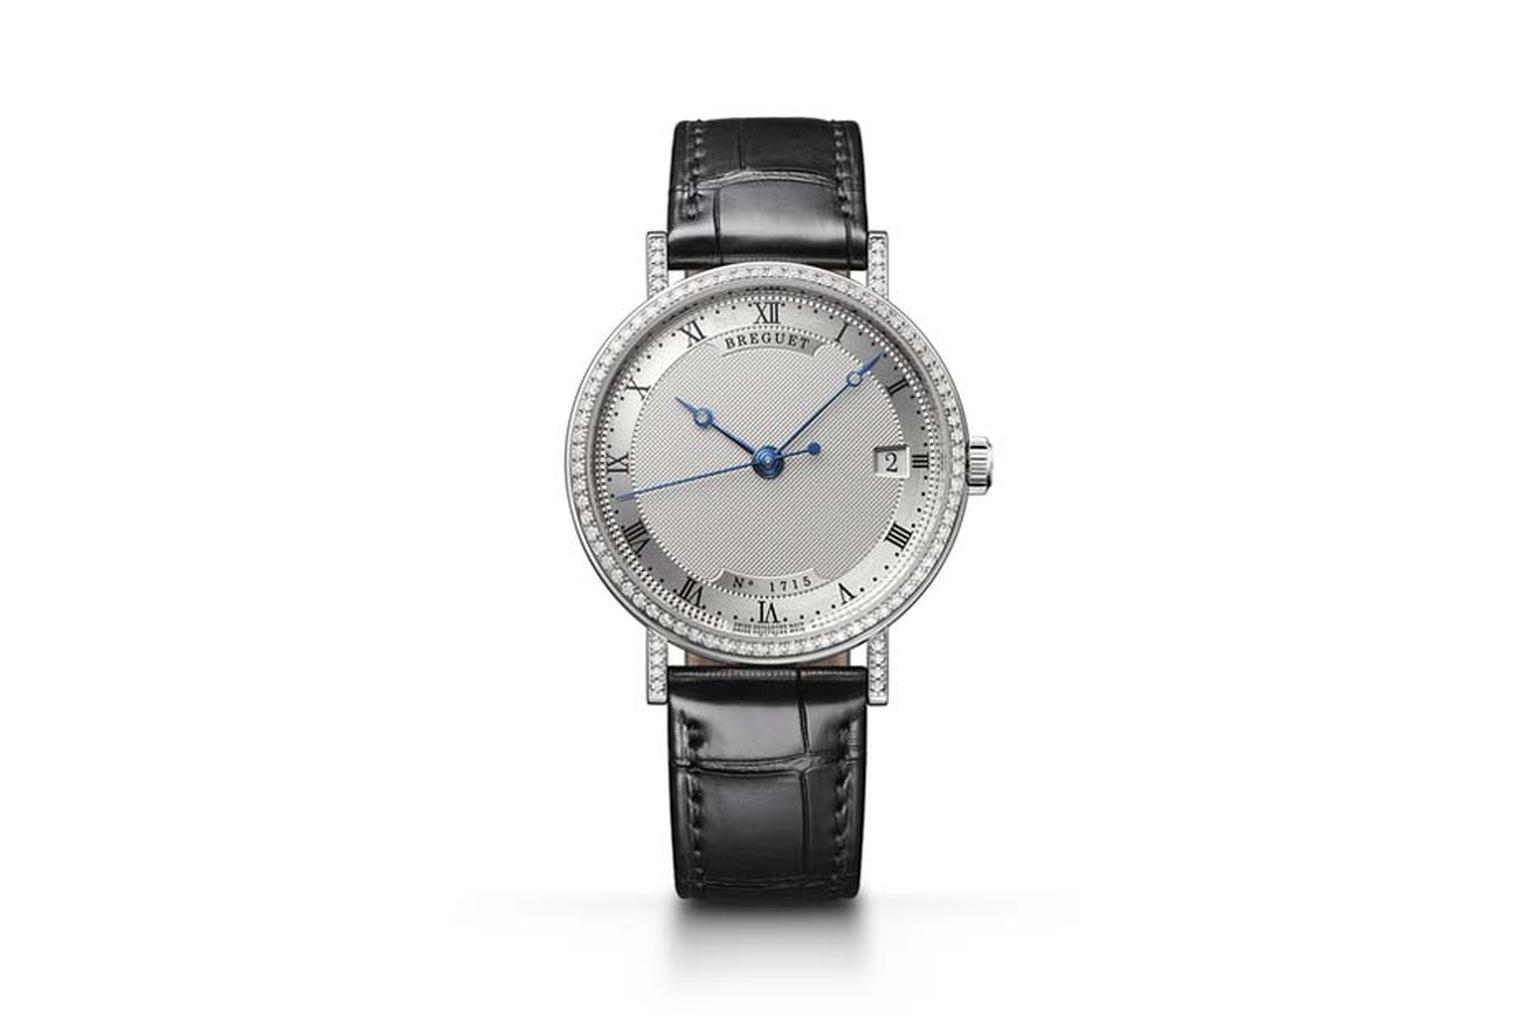 The GPHG Prize awarded by the Public was for the ladies’ Breguet Classique Dame in white gold with a sprinkling of diamonds.